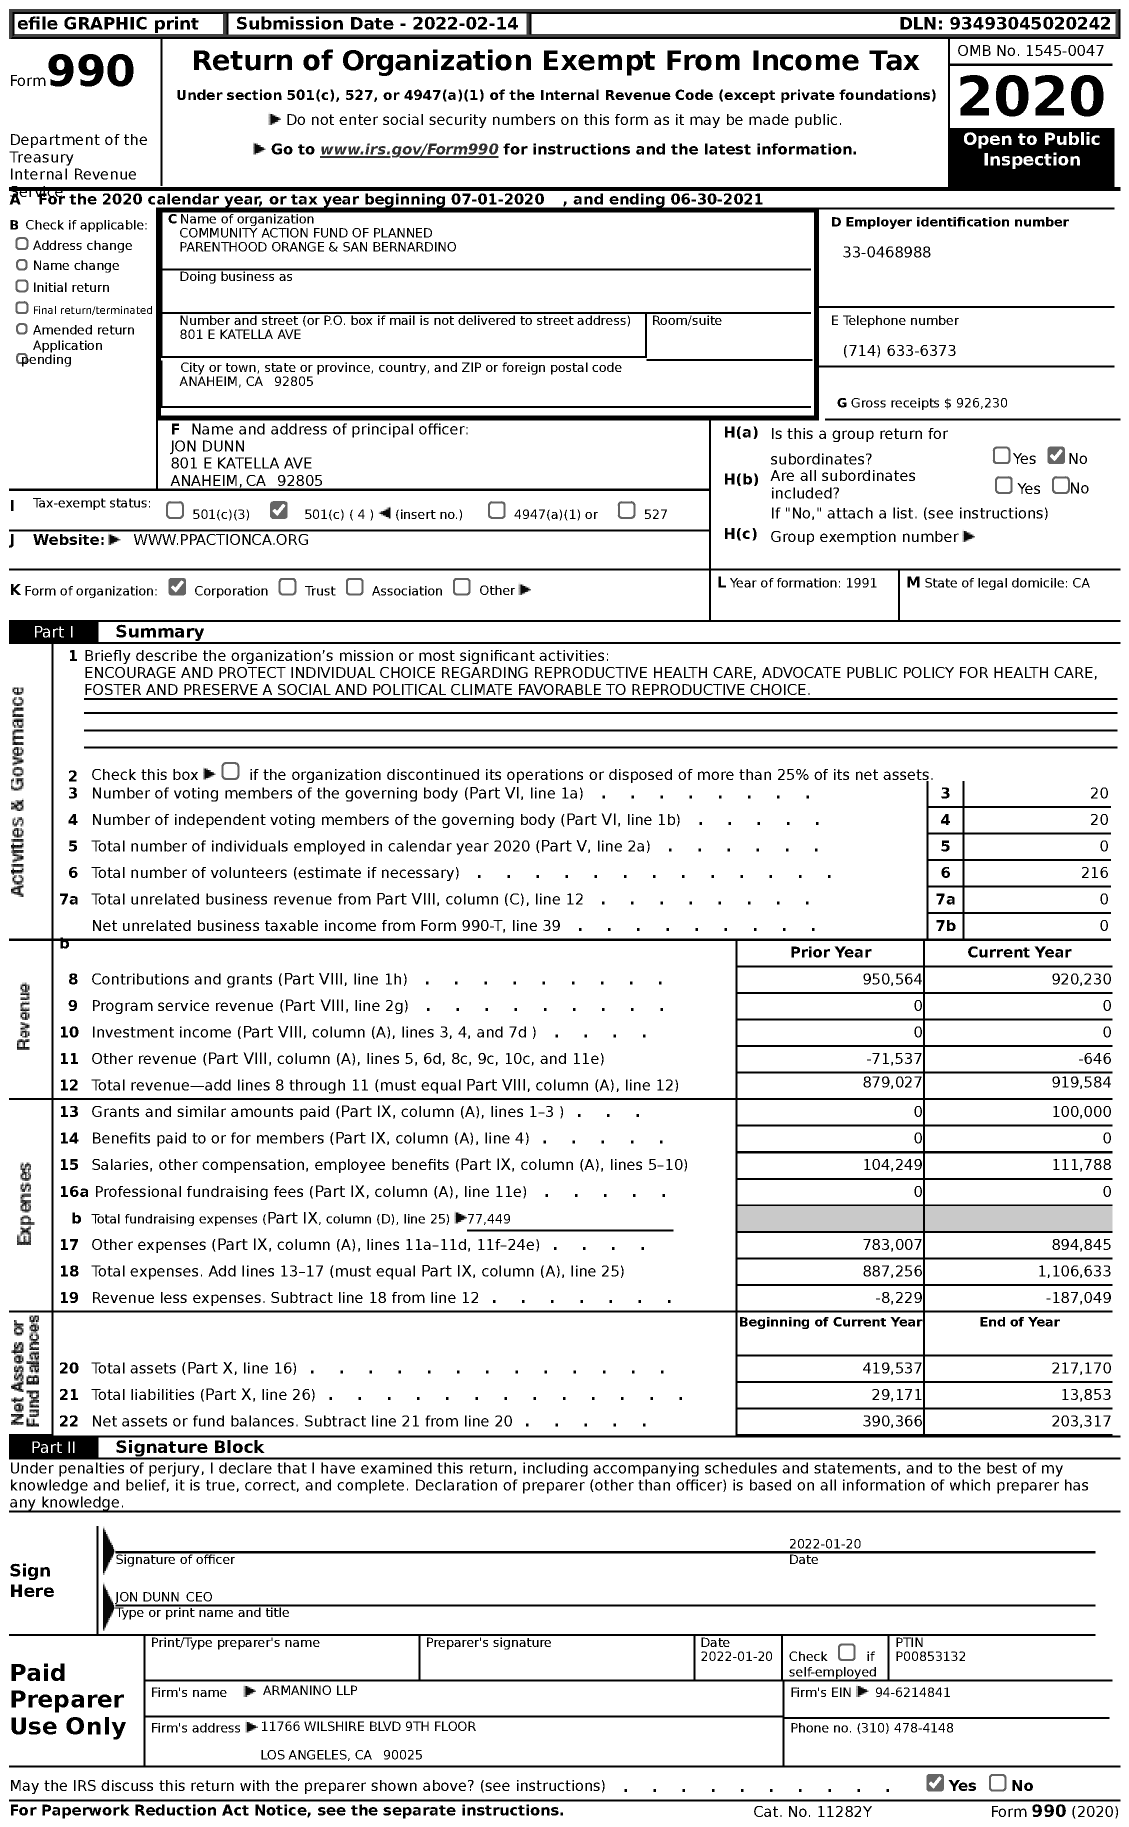 Image of first page of 2020 Form 990 for Community Action Fund of Planned Parenthood Orange and San Bernardino